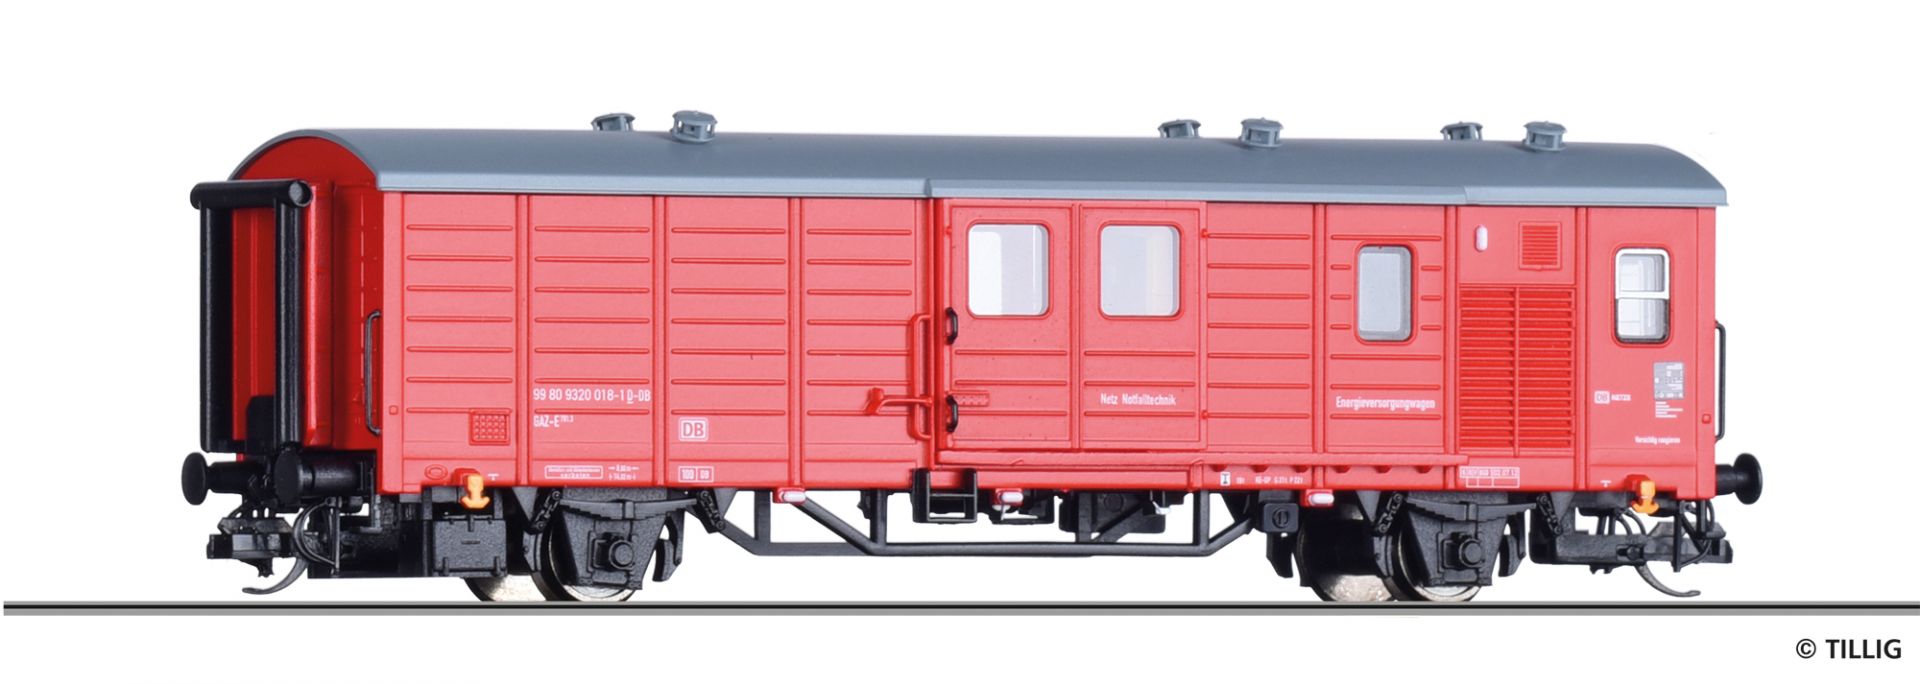 502300 | Energy support car DB AG -sold out-